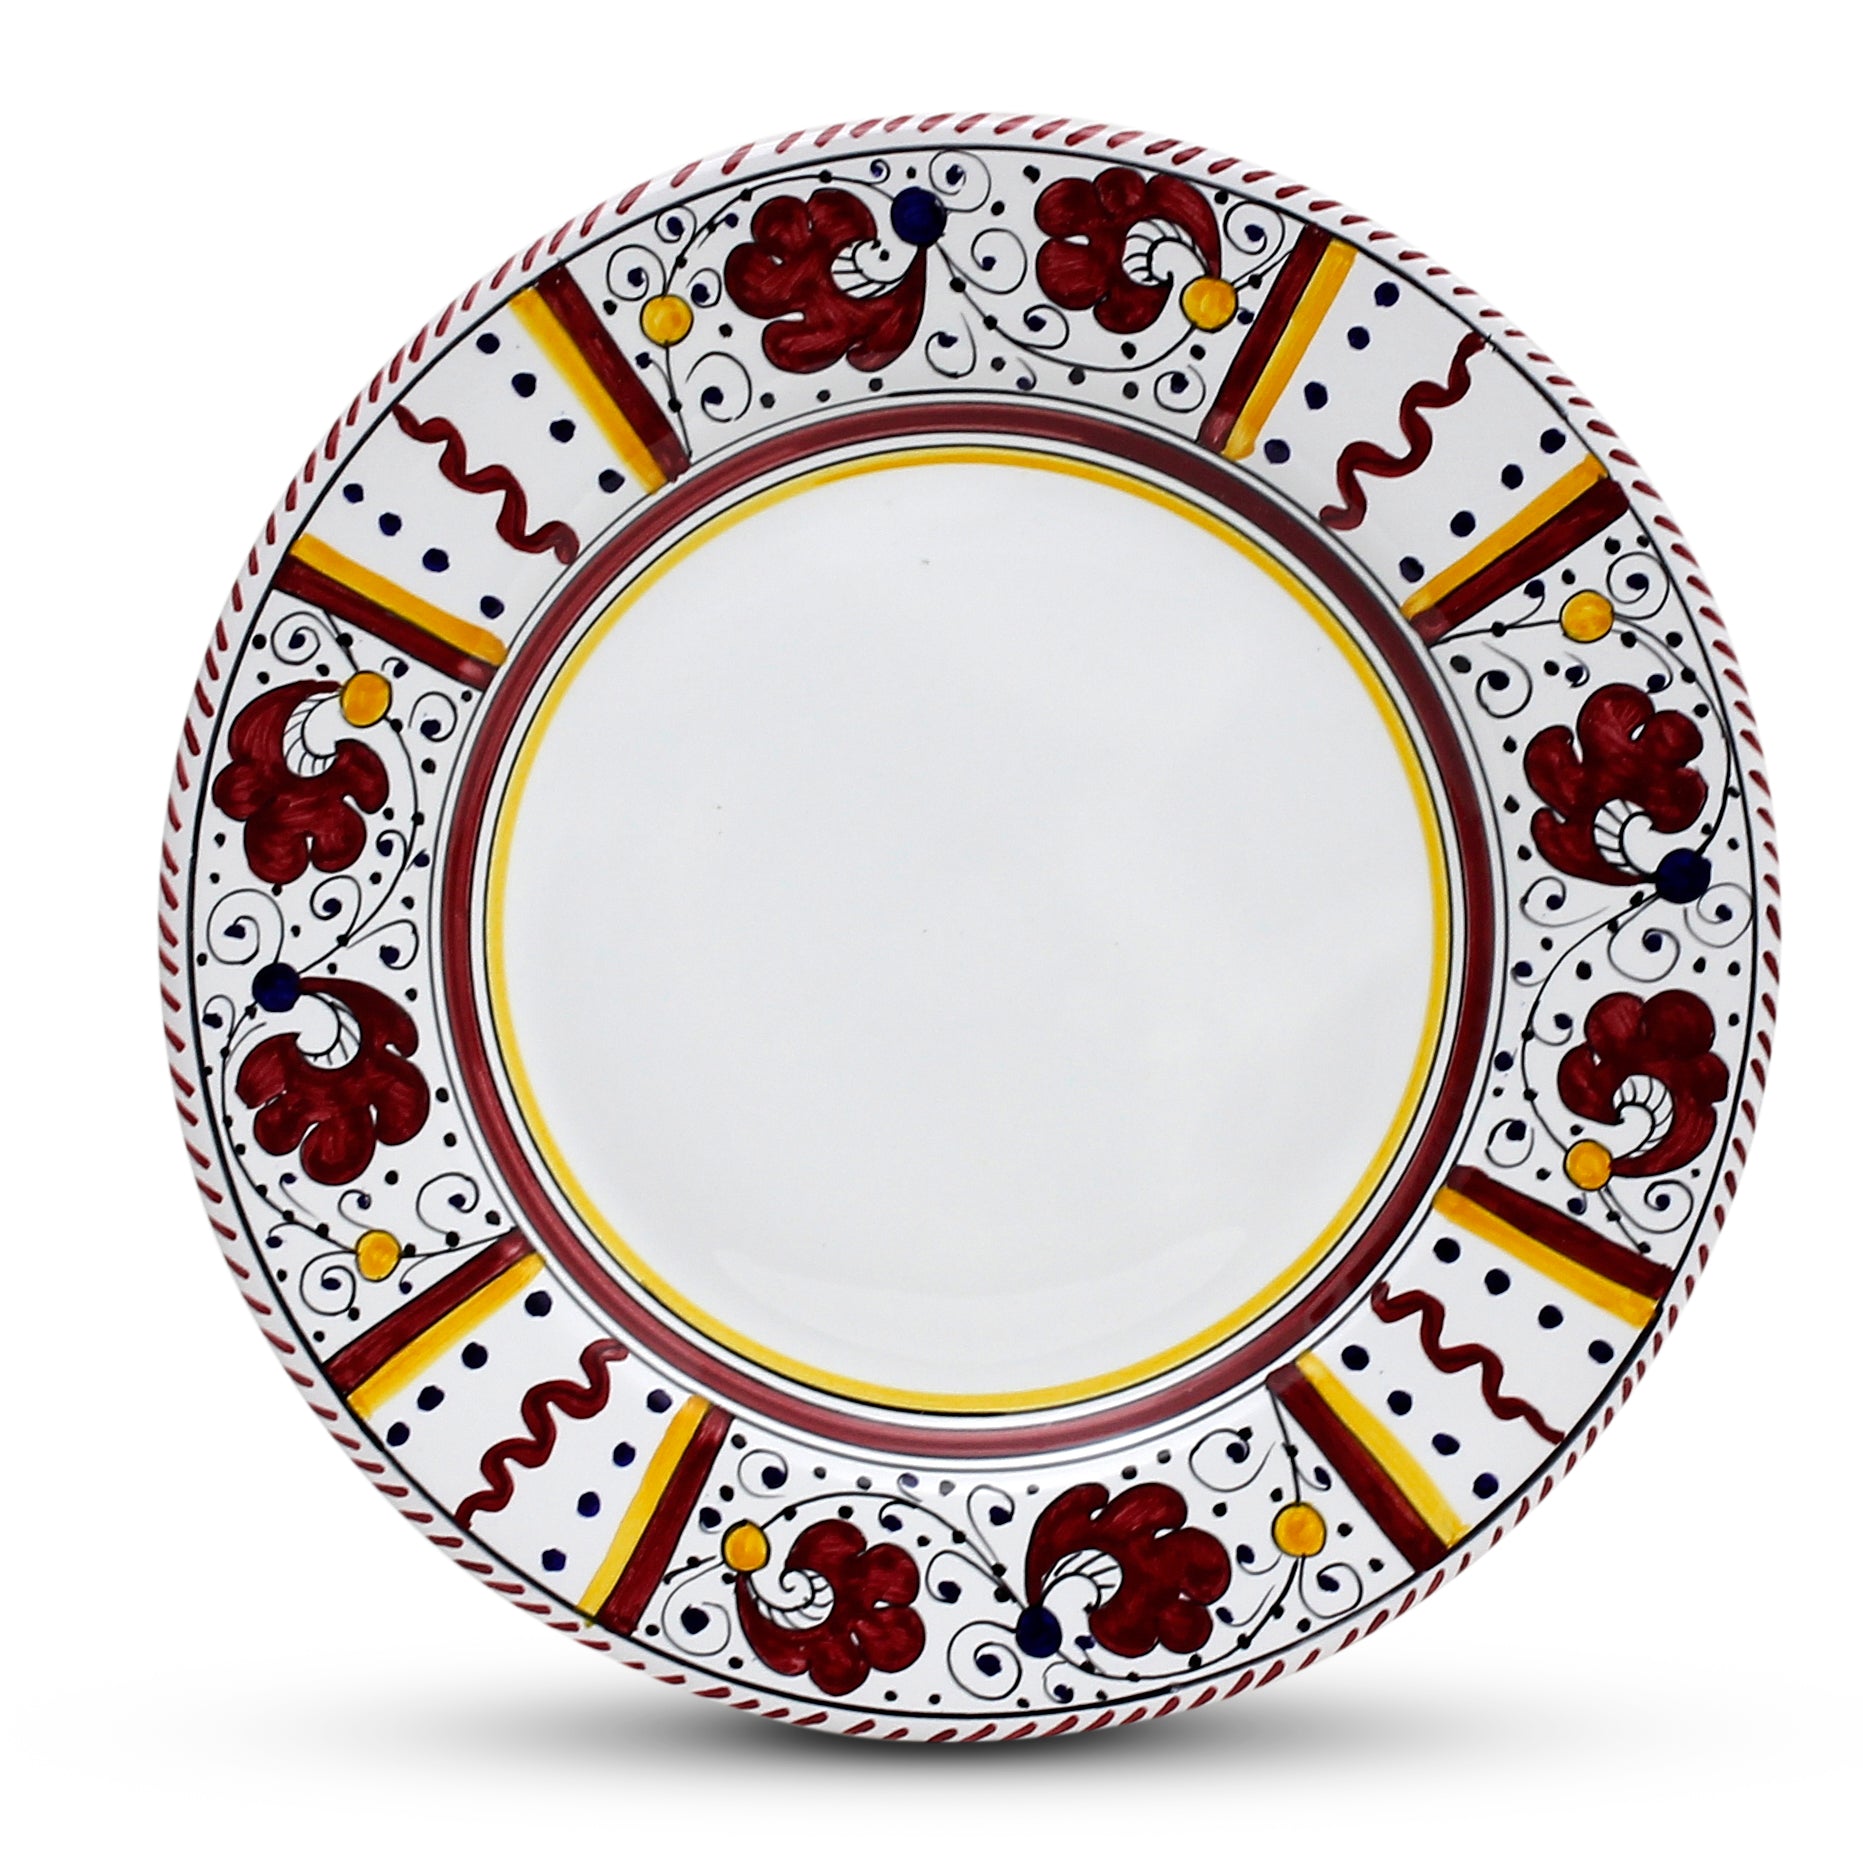 ORVIETO RED ROOSTER: 4 Pieces Place Dinnerware Setting - Artistica.com